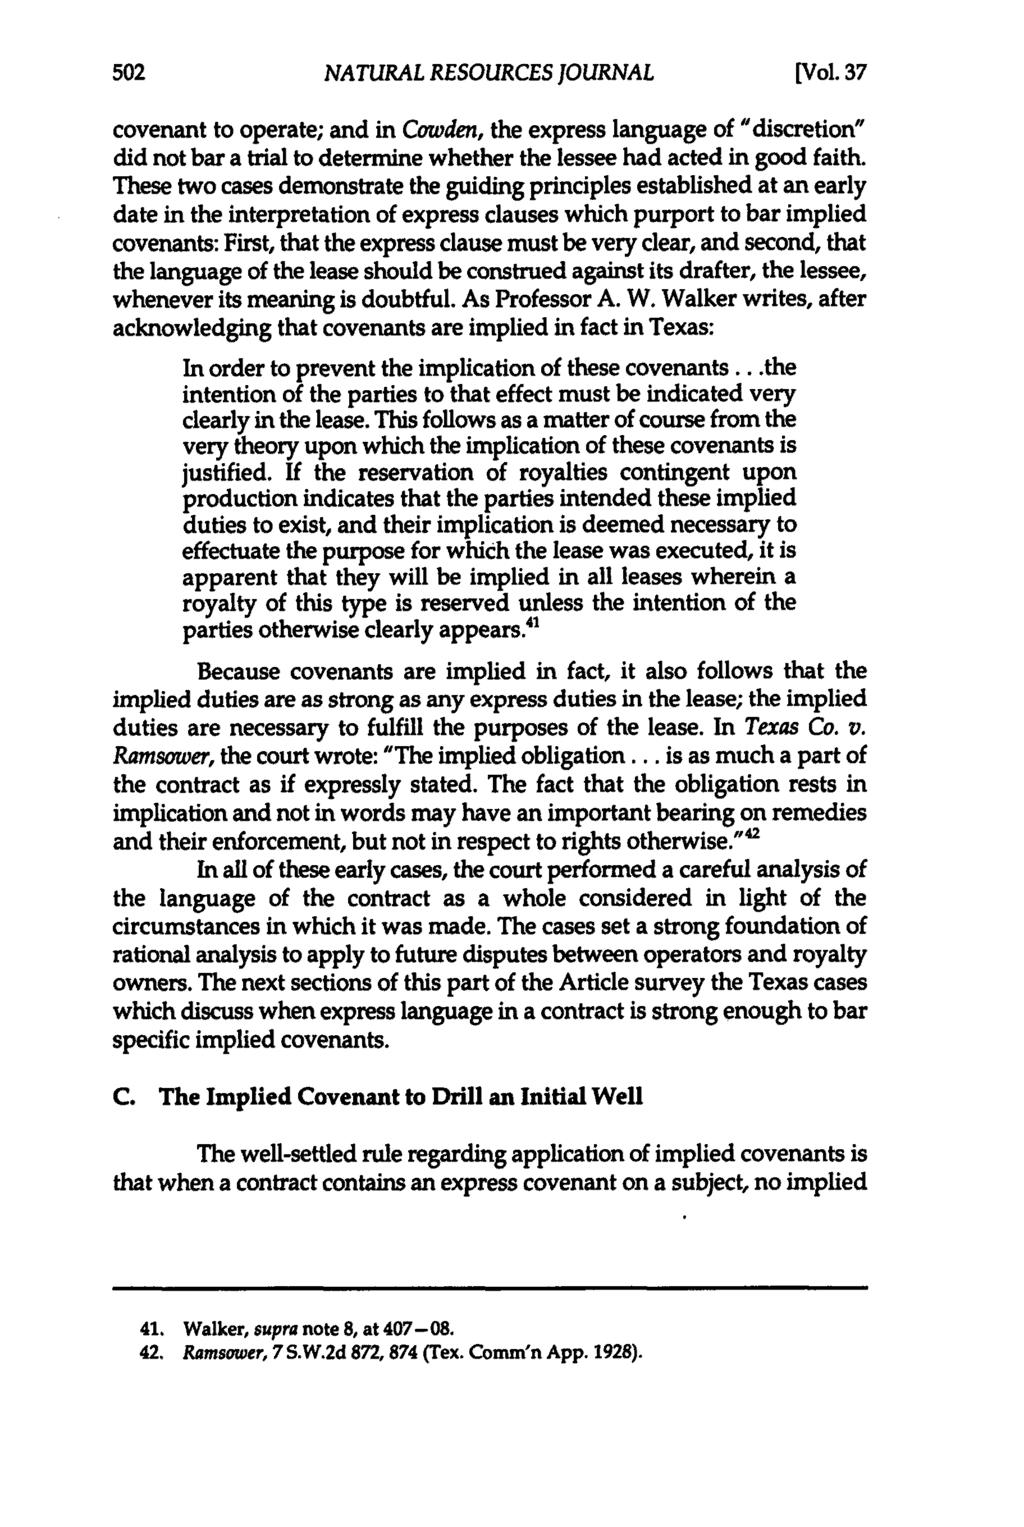 NATURAL RESOURCES JOURNAL [Vol 37 covenant to operate; and in Cowden, the express language of "discretion" did not bar a trial to determine whether the lessee had acted in good faith.